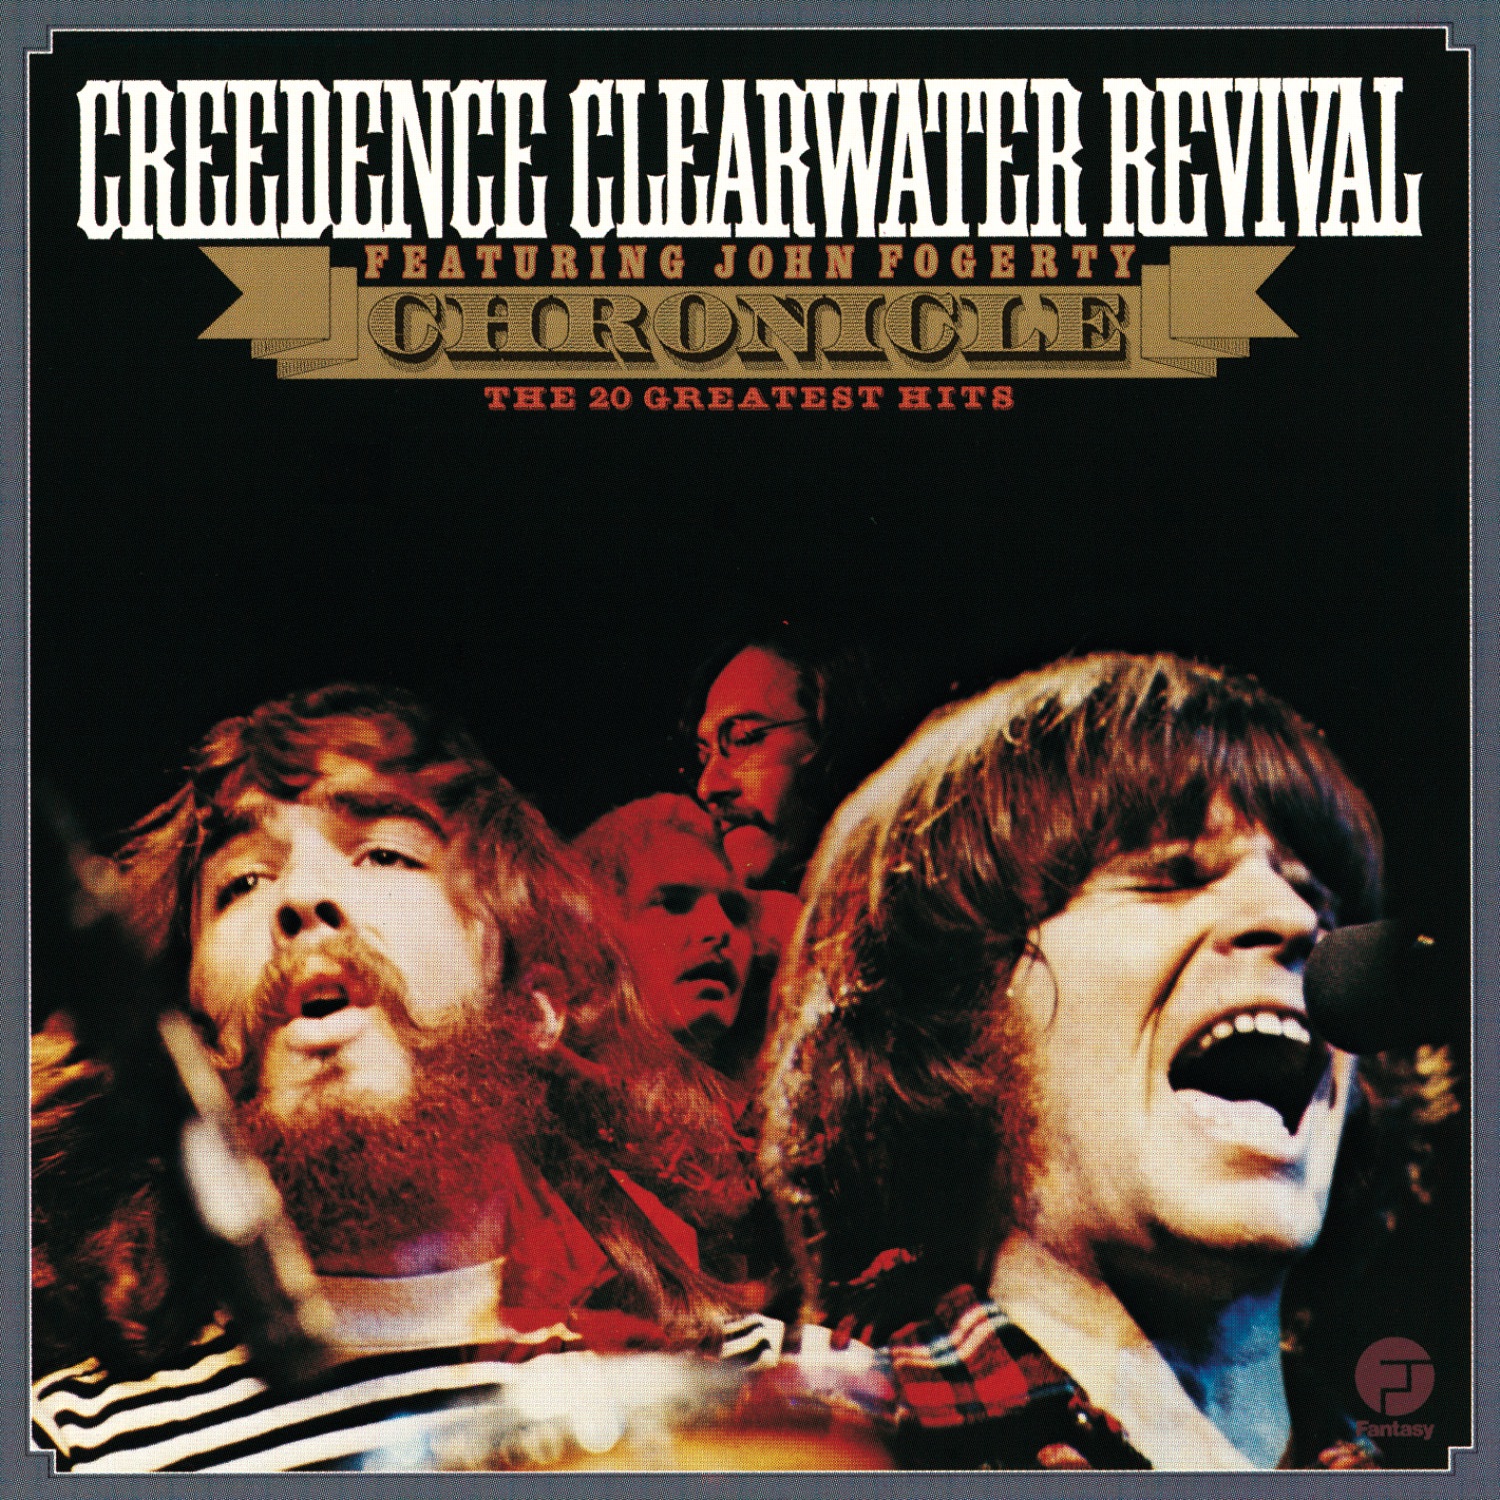 Art for Bad Moon Rising by Creedence Clearwater Revival